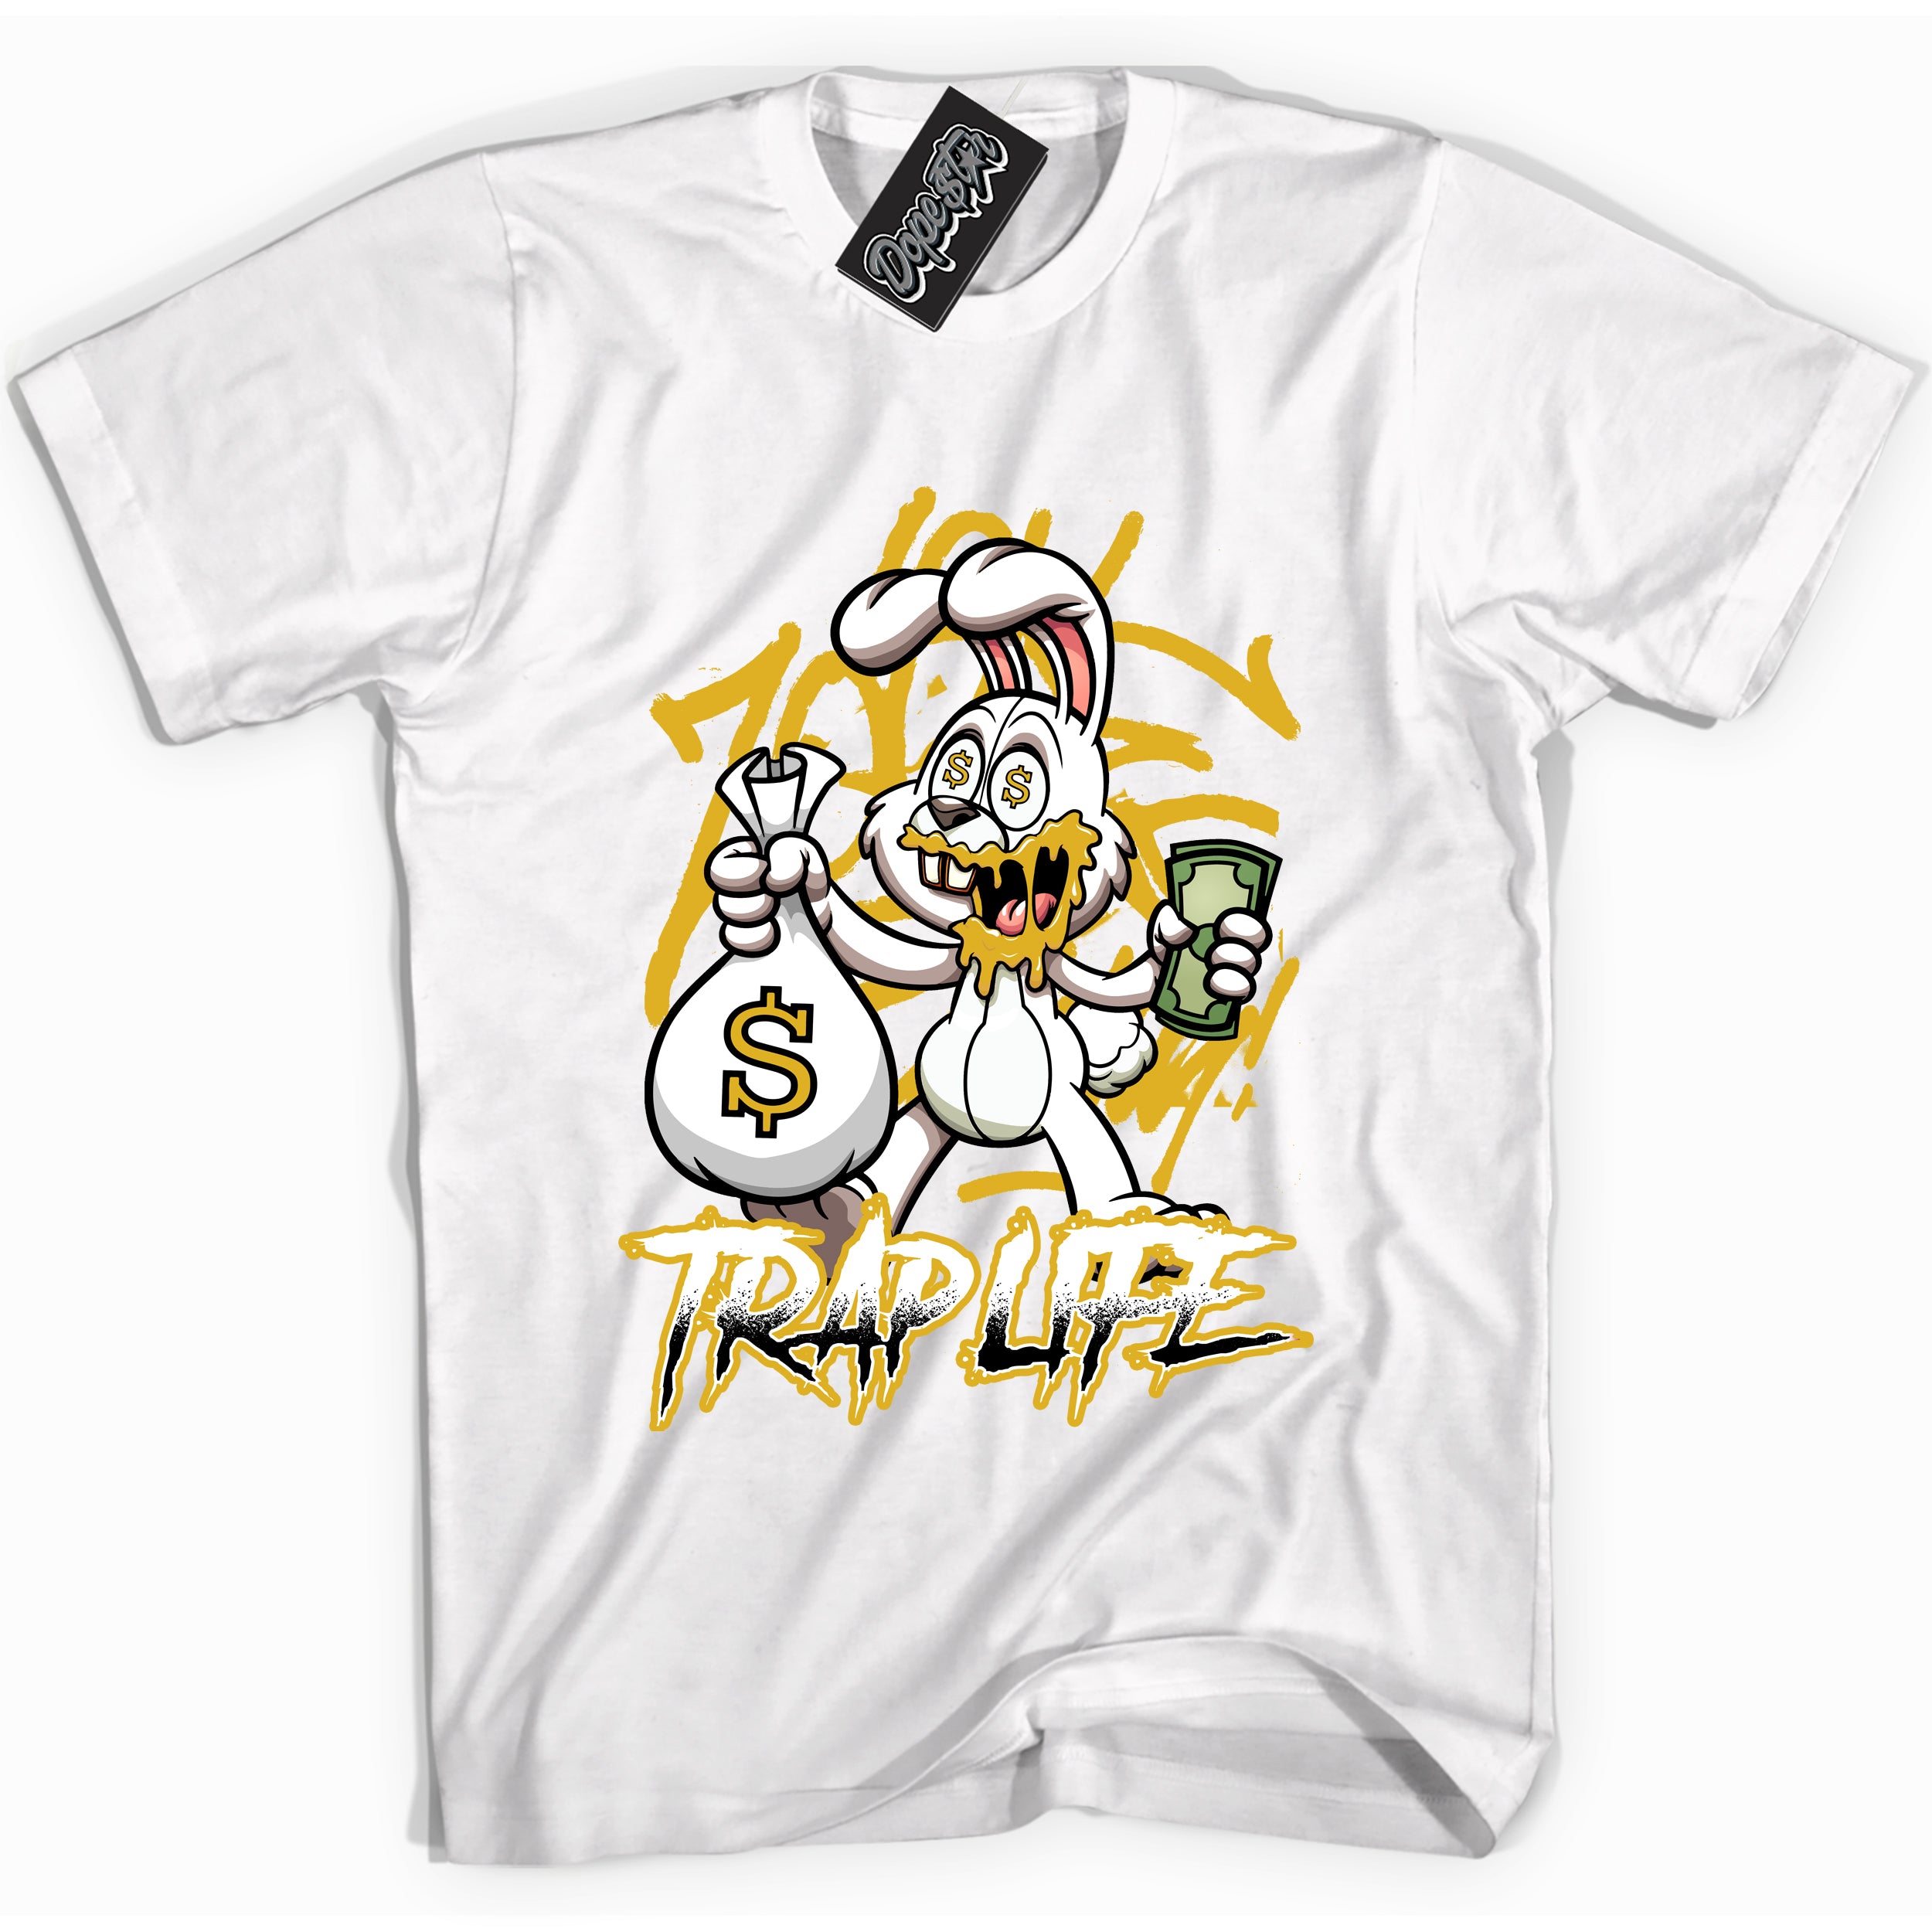 Cool White Shirt with “ Trap Rabbit” design that perfectly matches Yellow Ochre 6s Sneakers.